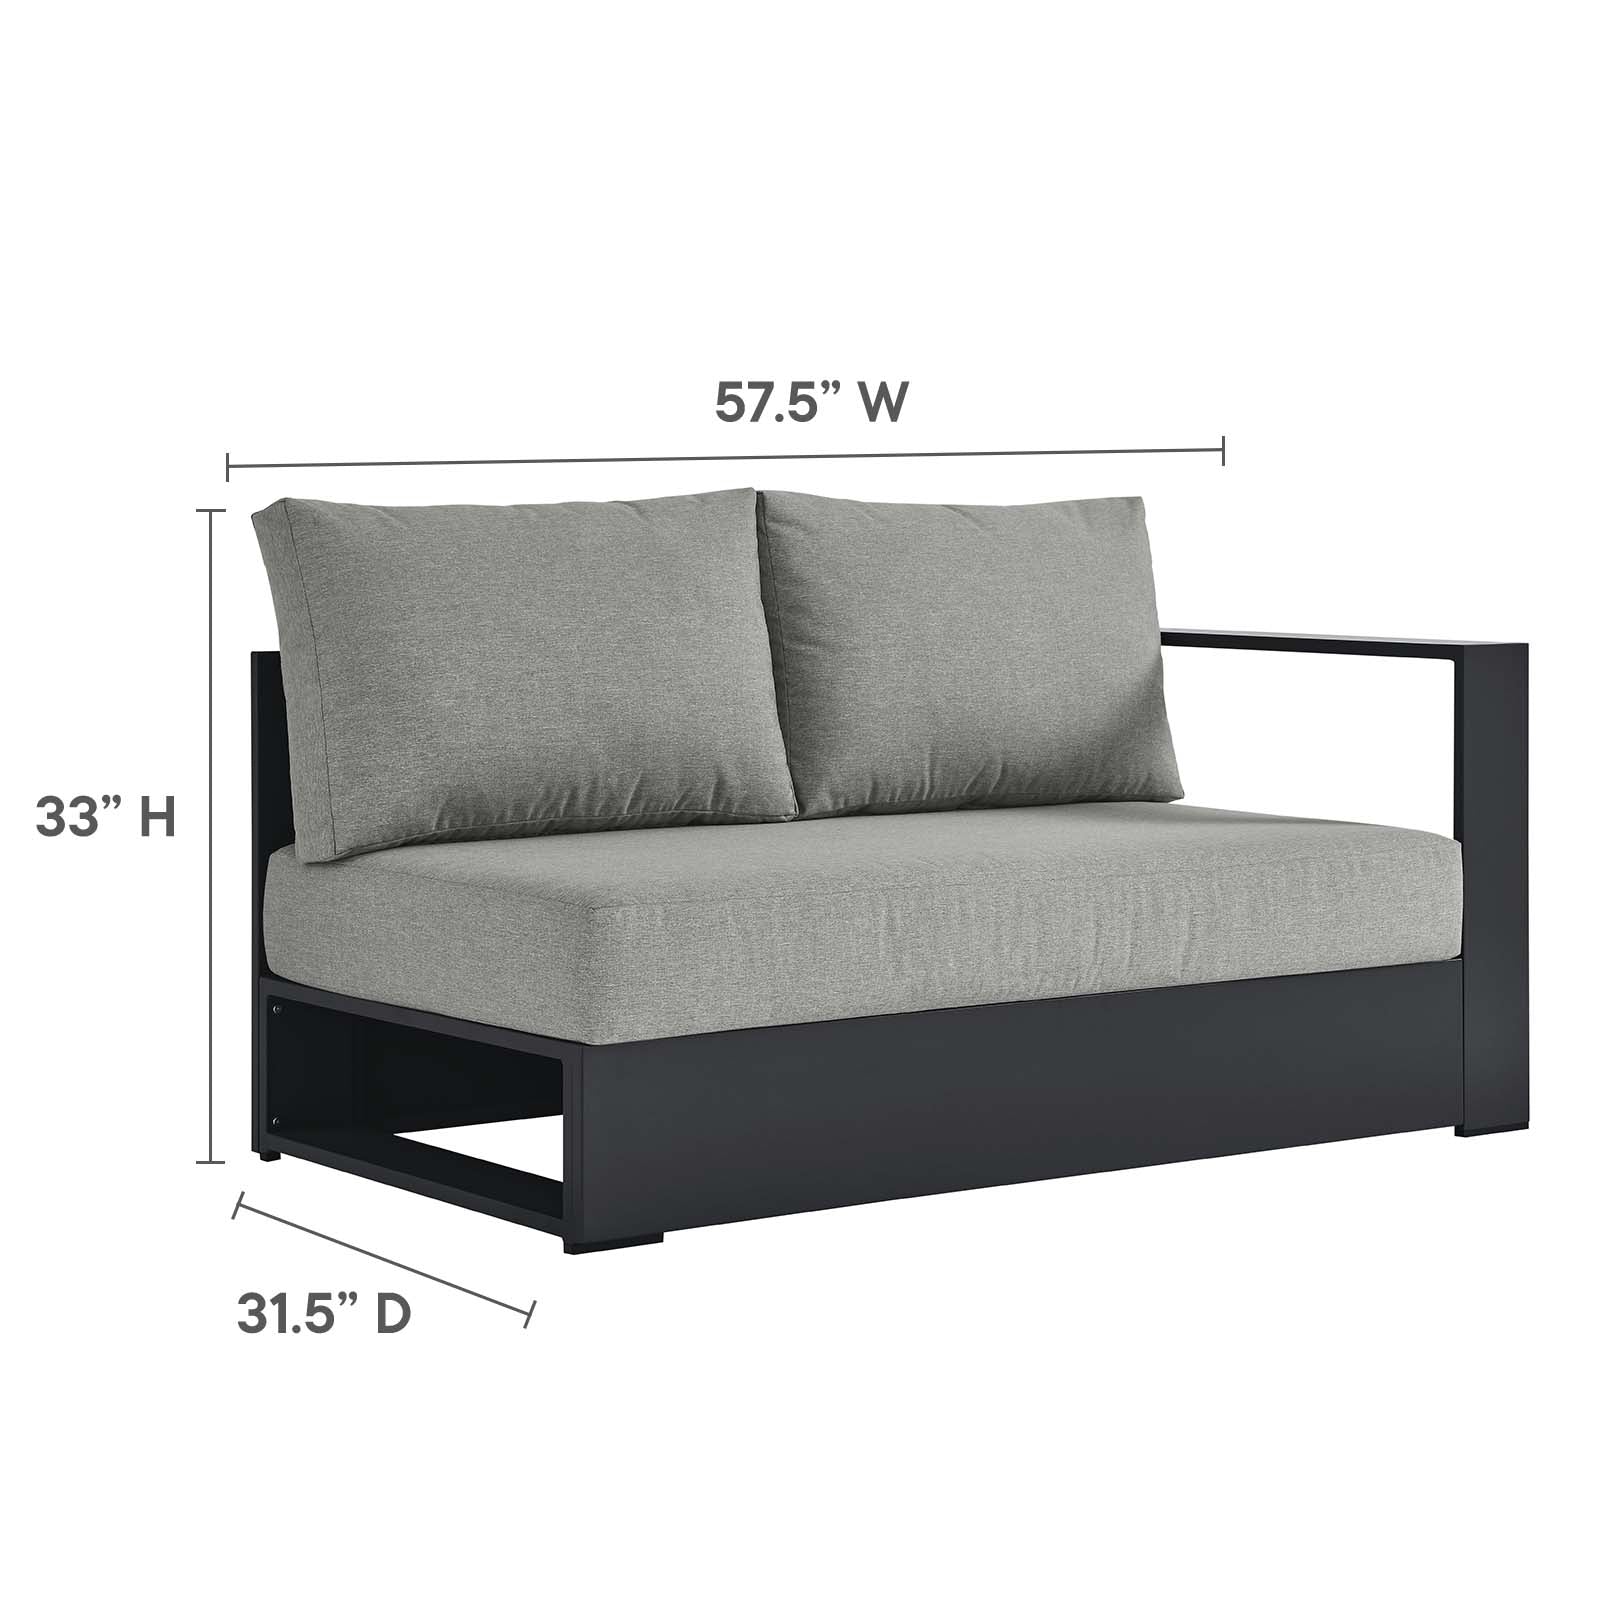 Tahoe Outdoor Patio Powder-Coated Aluminum 3-Piece Left-Facing Chaise Sectional Sofa Set - East Shore Modern Home Furnishings